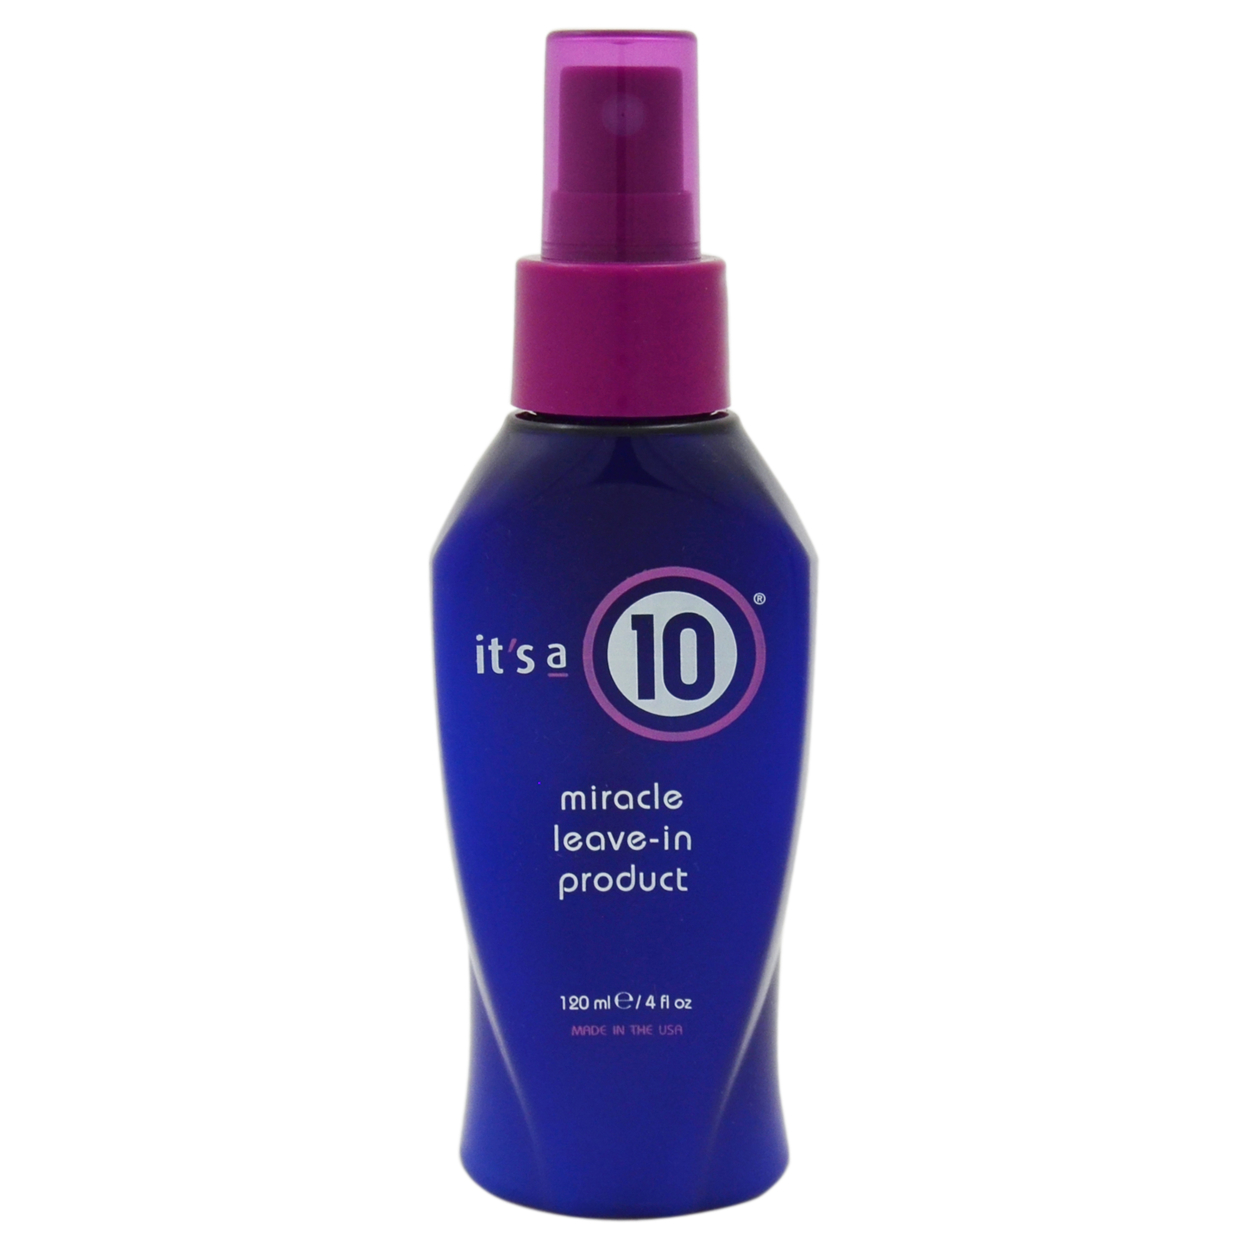 It's a 10 Miracle Leave-in Product 4 oz - image 1 of 8